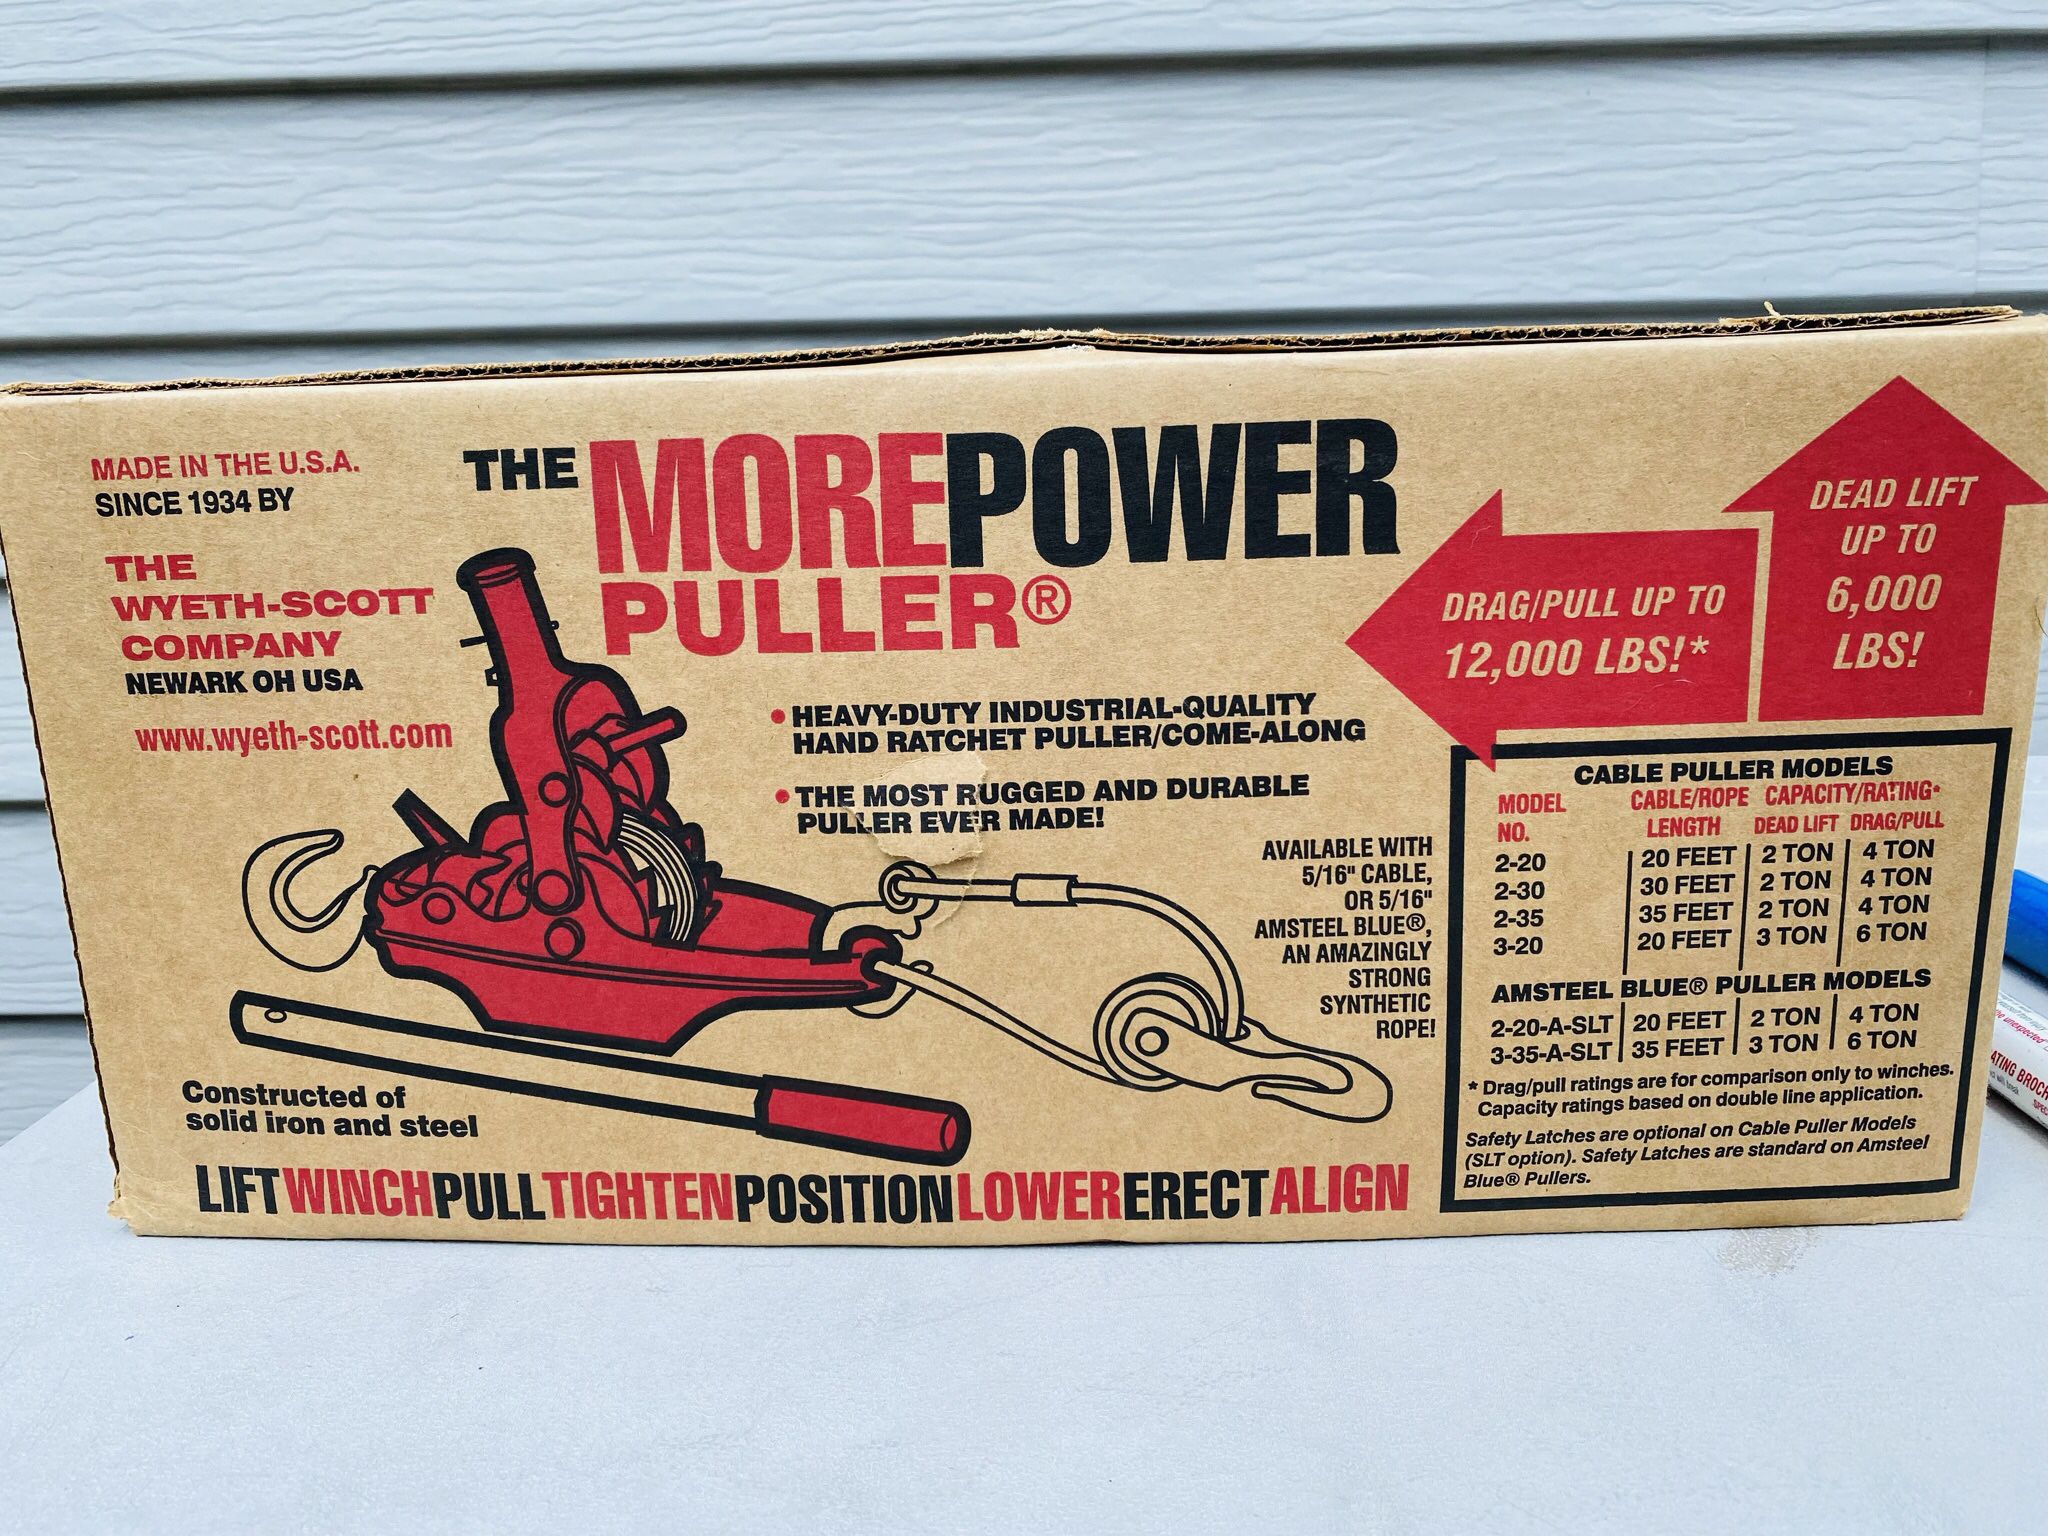 3 Ton Wyeth More Power Puller/ Winch Amsteel Blue Synthetic Rope 35 Foot  Never Used /Brand new with Box!